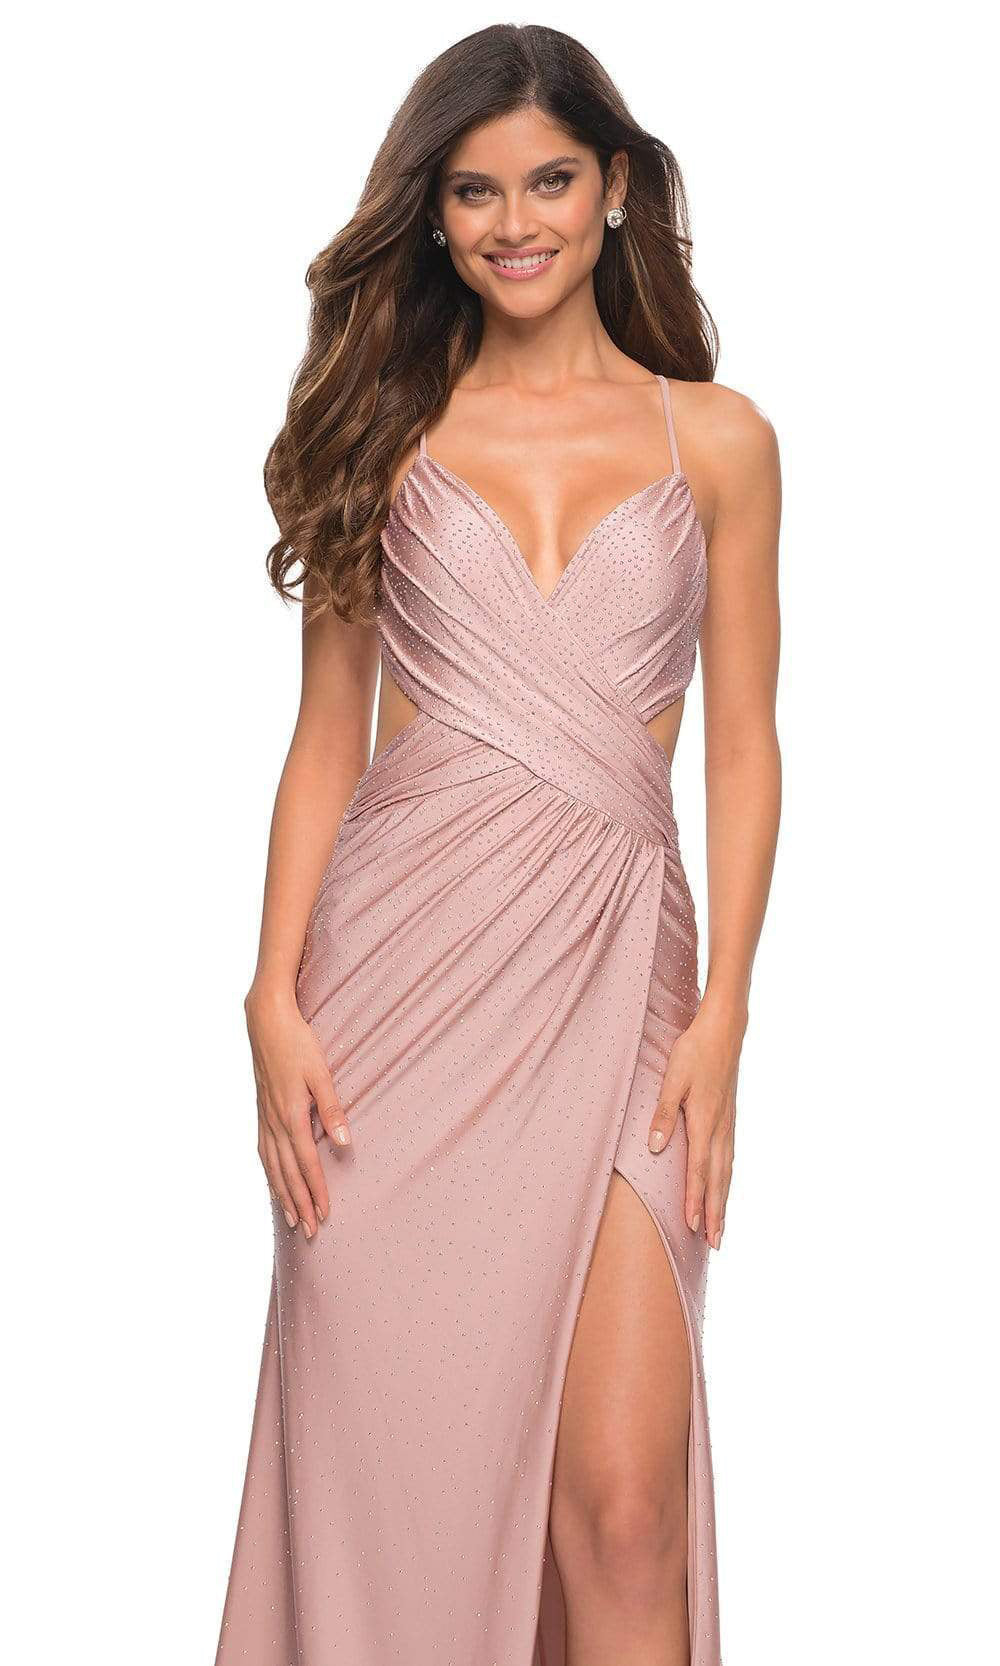 La Femme - 30504 V Neck Beaded Crisscross Long Gown In Pink and Neutral